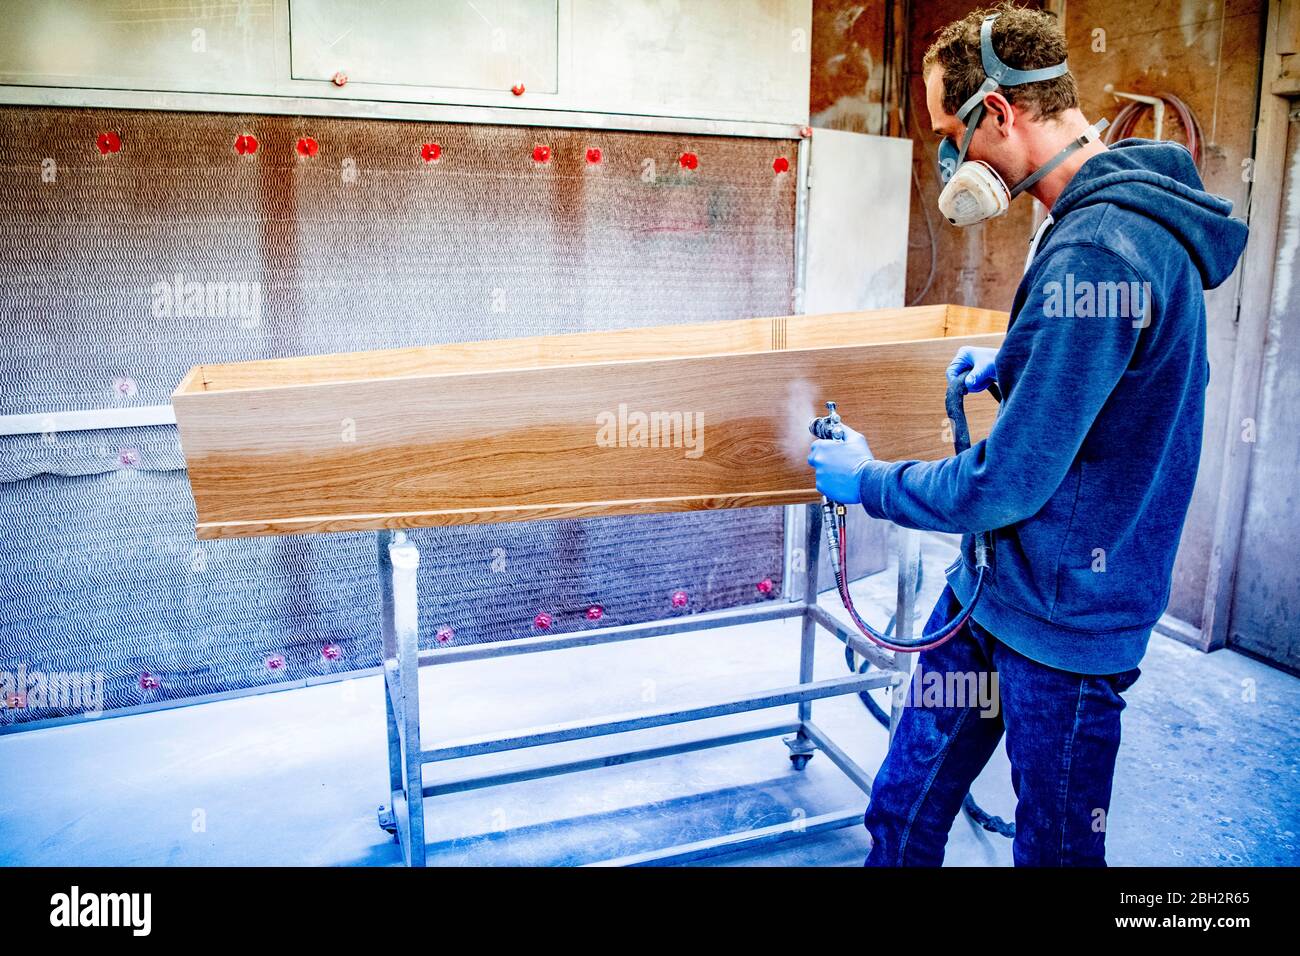 Gendringe, Netherlands. 23rd Apr, 2020. An employee makes a casket while wearing a face mask against Coronavirus as a preventive measure at Tomba coffin maker.As the Coronavirus pandemic ravages Netherlands one coffin design firm south of Gendering has been busy delivering hundreds of caskets per week to double the usual production capacity. Coffin makers and the funeral industry at large are working hard. Credit: SOPA Images Limited/Alamy Live News Stock Photo